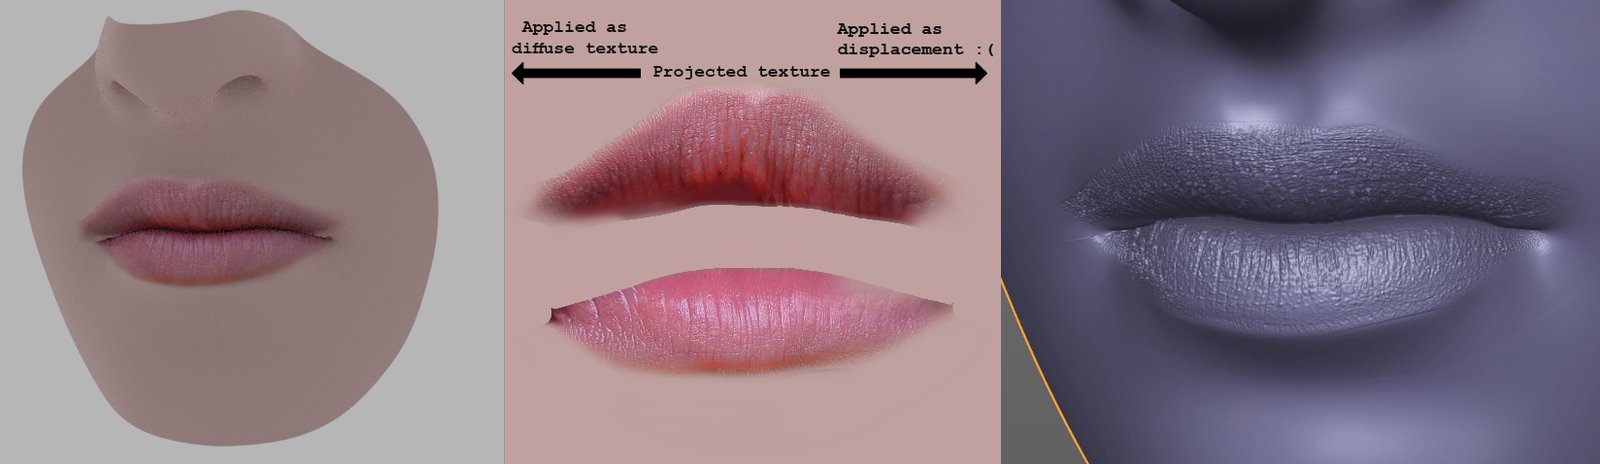 base lips model with projected texture